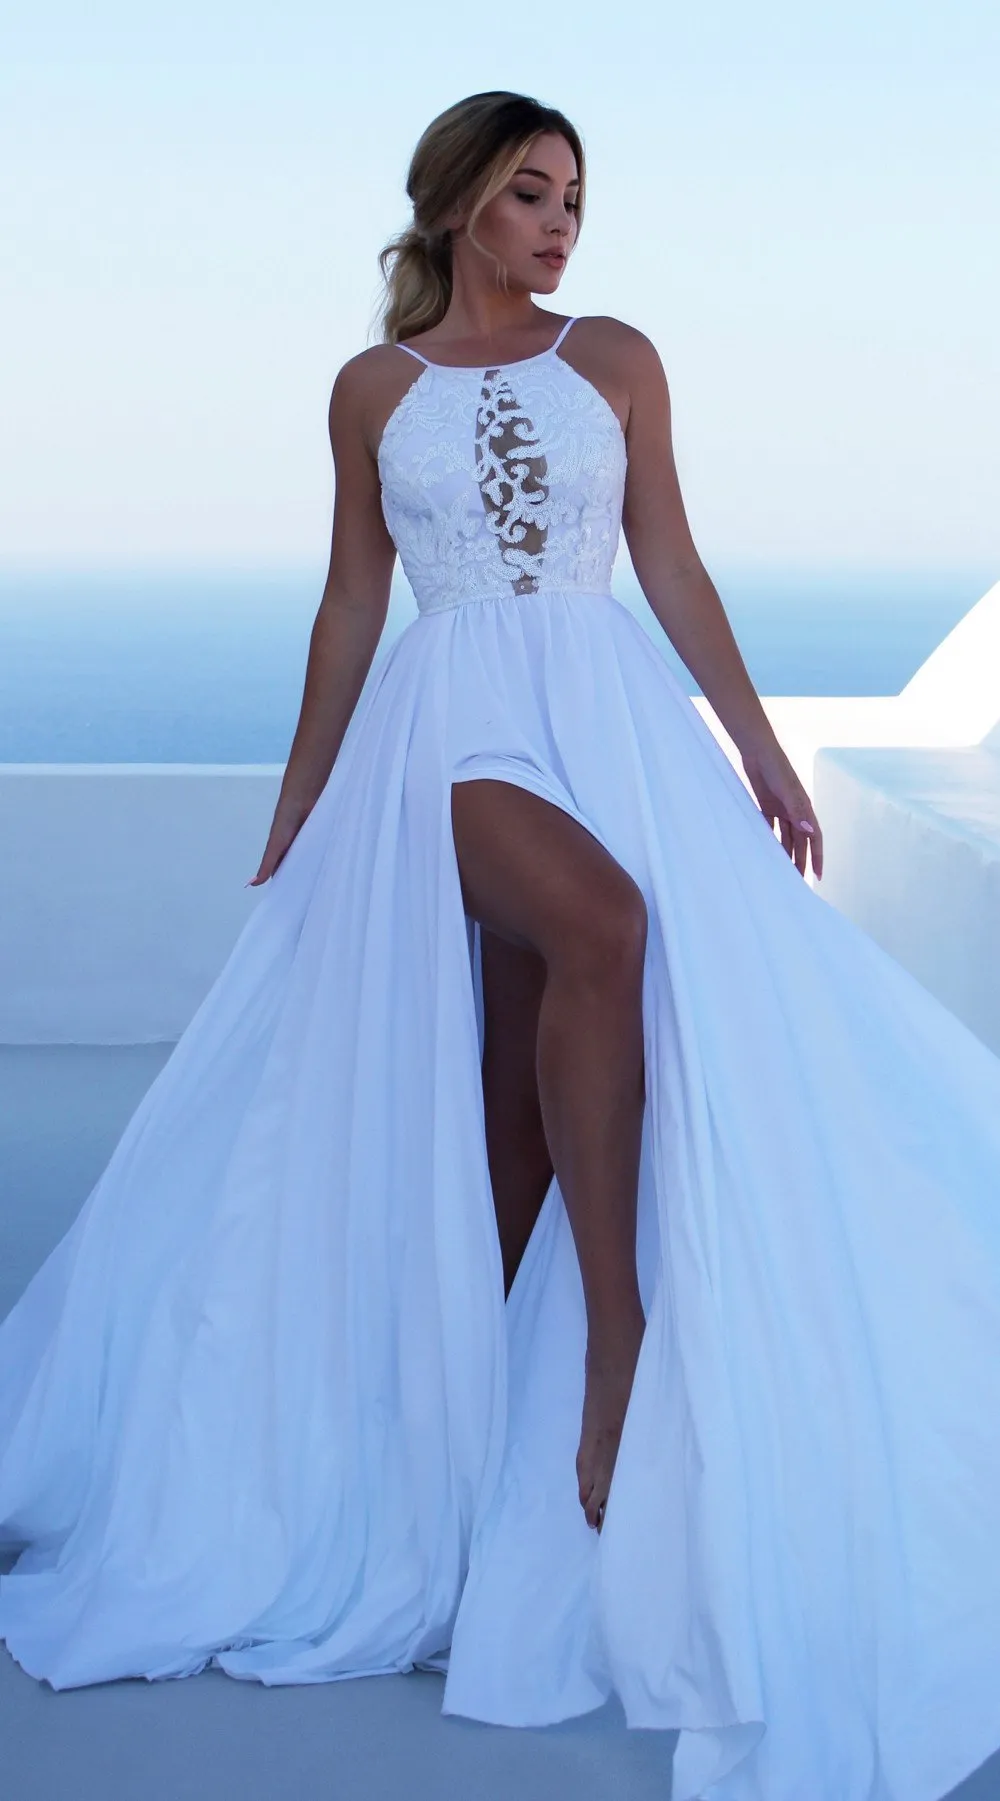 Mariage Bohemian Ivory Long Wedding Dress 2020 Sexy BOHO Wedding Gowns Scoop Spandex Lace Backless Chic Beach Bride Dresses Party